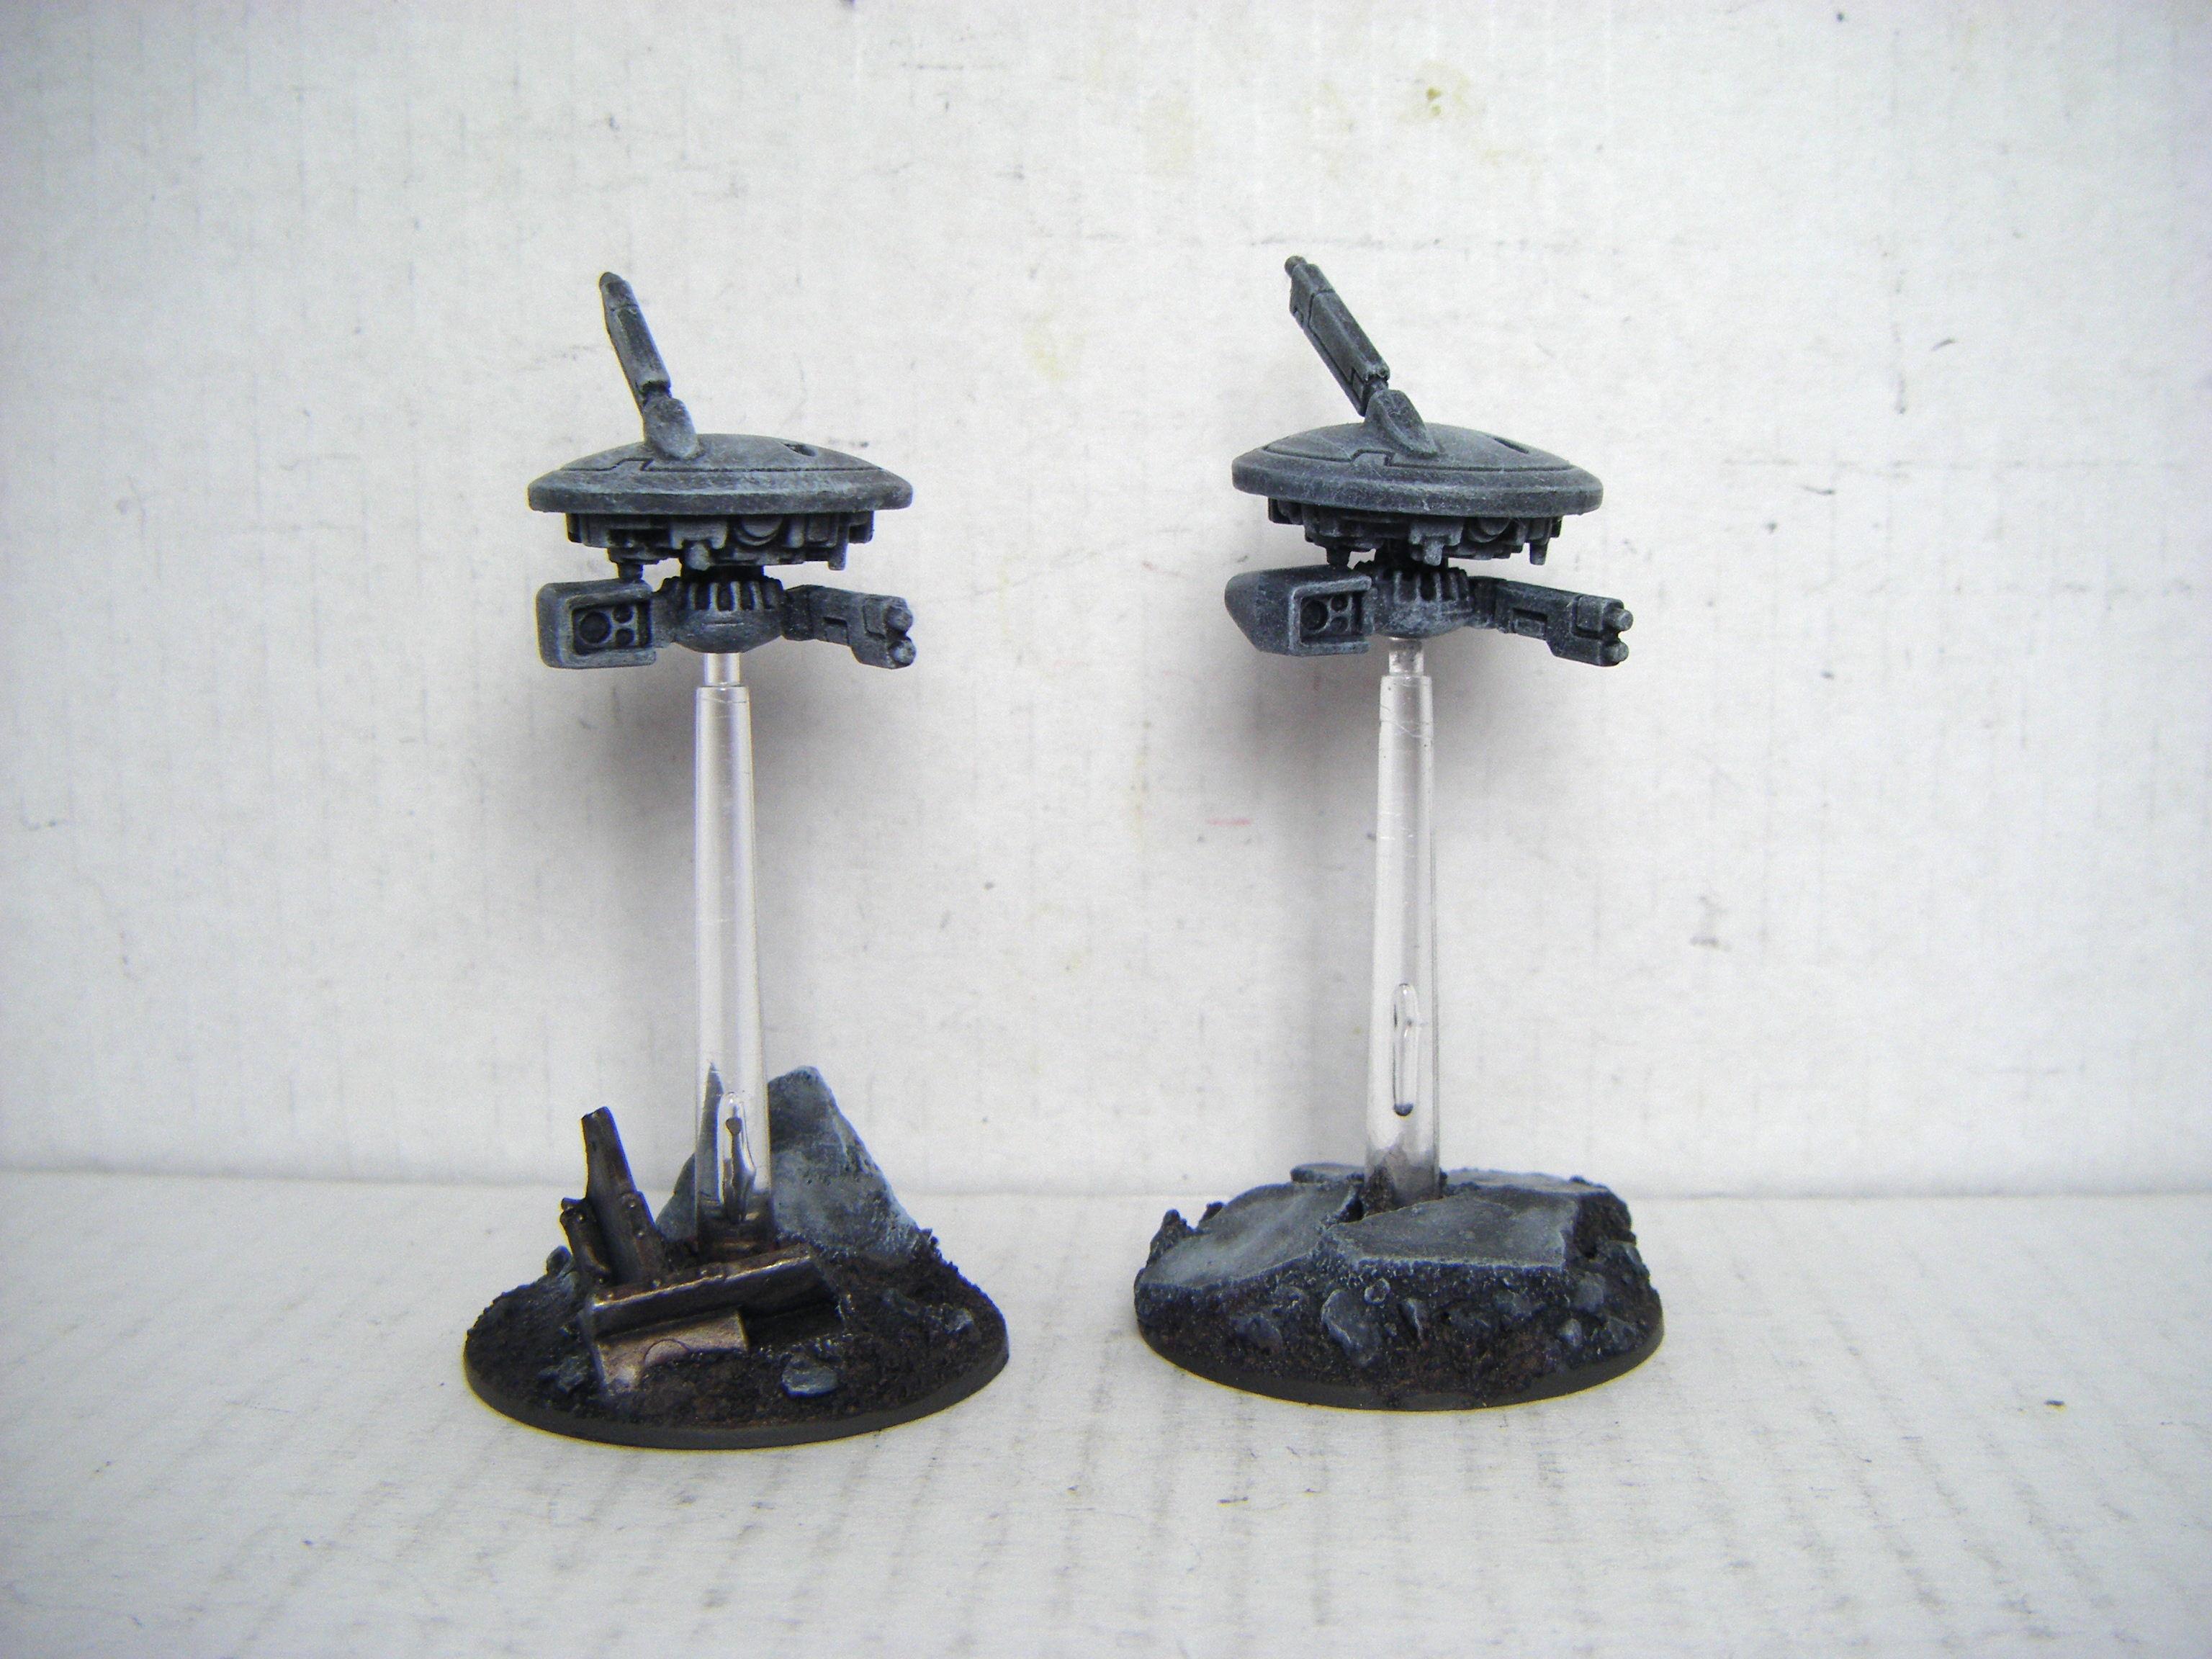 derefter TVsæt pistol Drone, Marker Drones (Cloaked) - Marker Drones (Cloaked) - Gallery -  DakkaDakka | Roll the dice to see if I'm getting drunk.